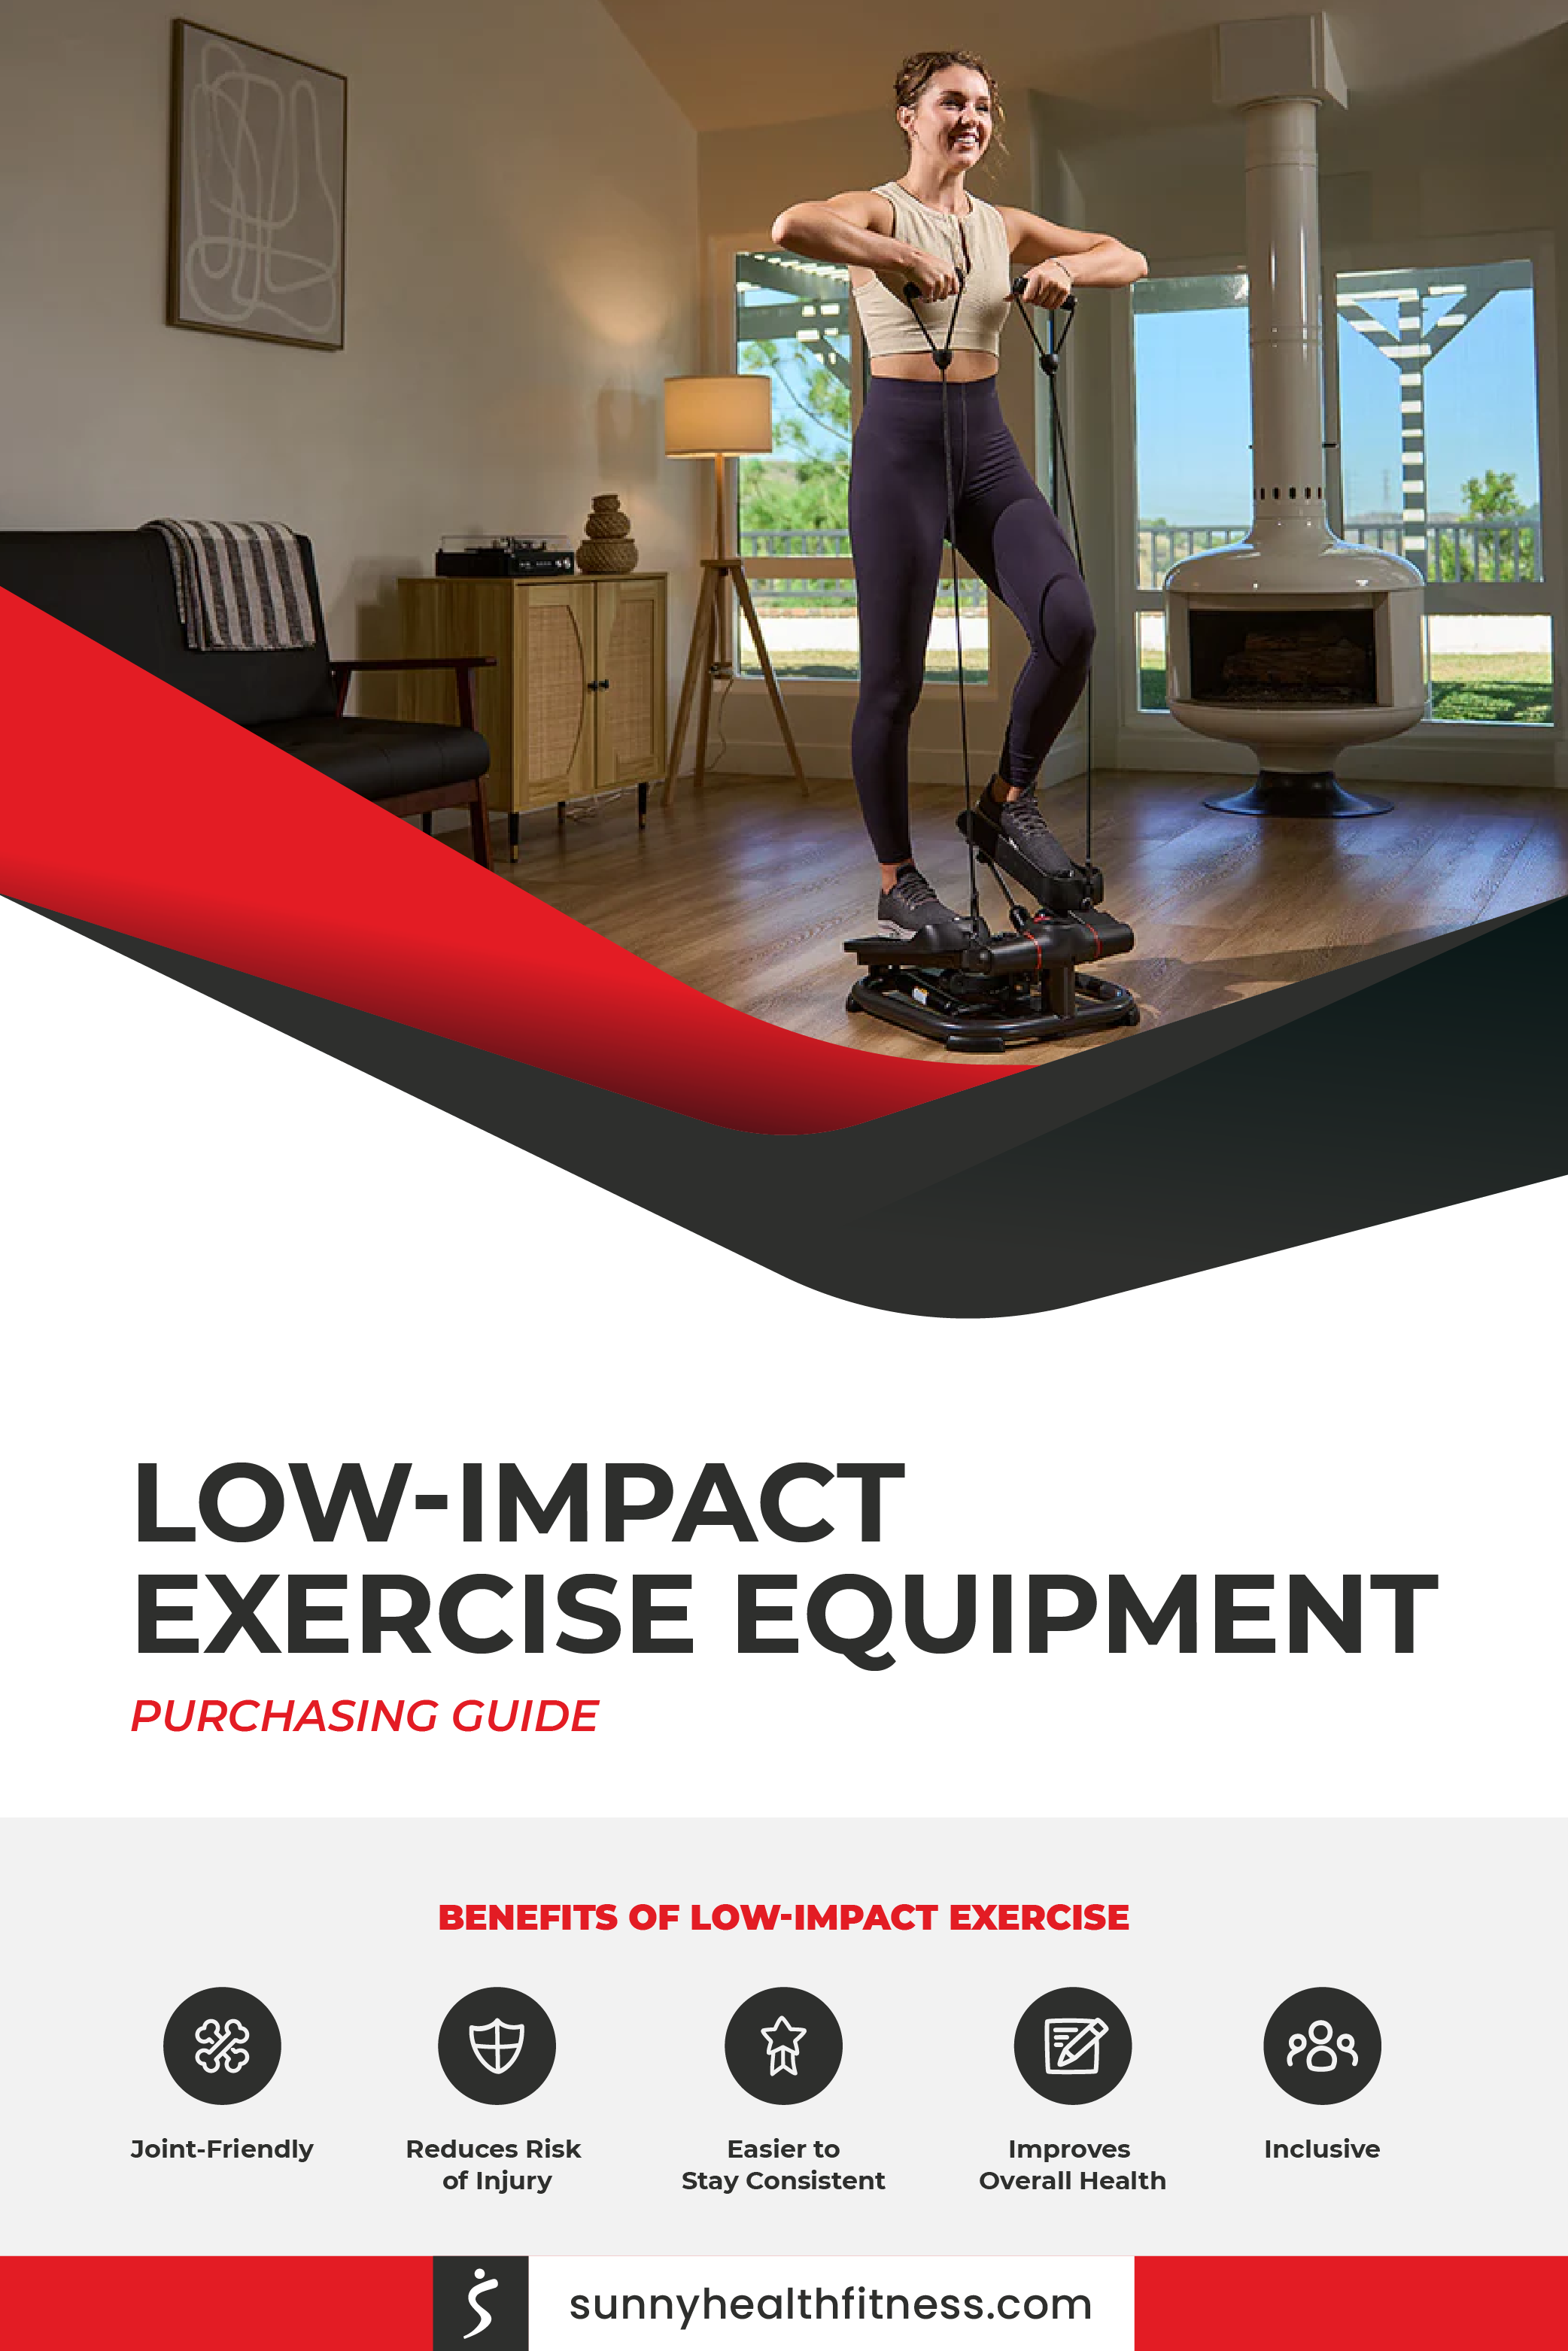 Low-Impact Exercise Equipment Purchasing Guide Infographic